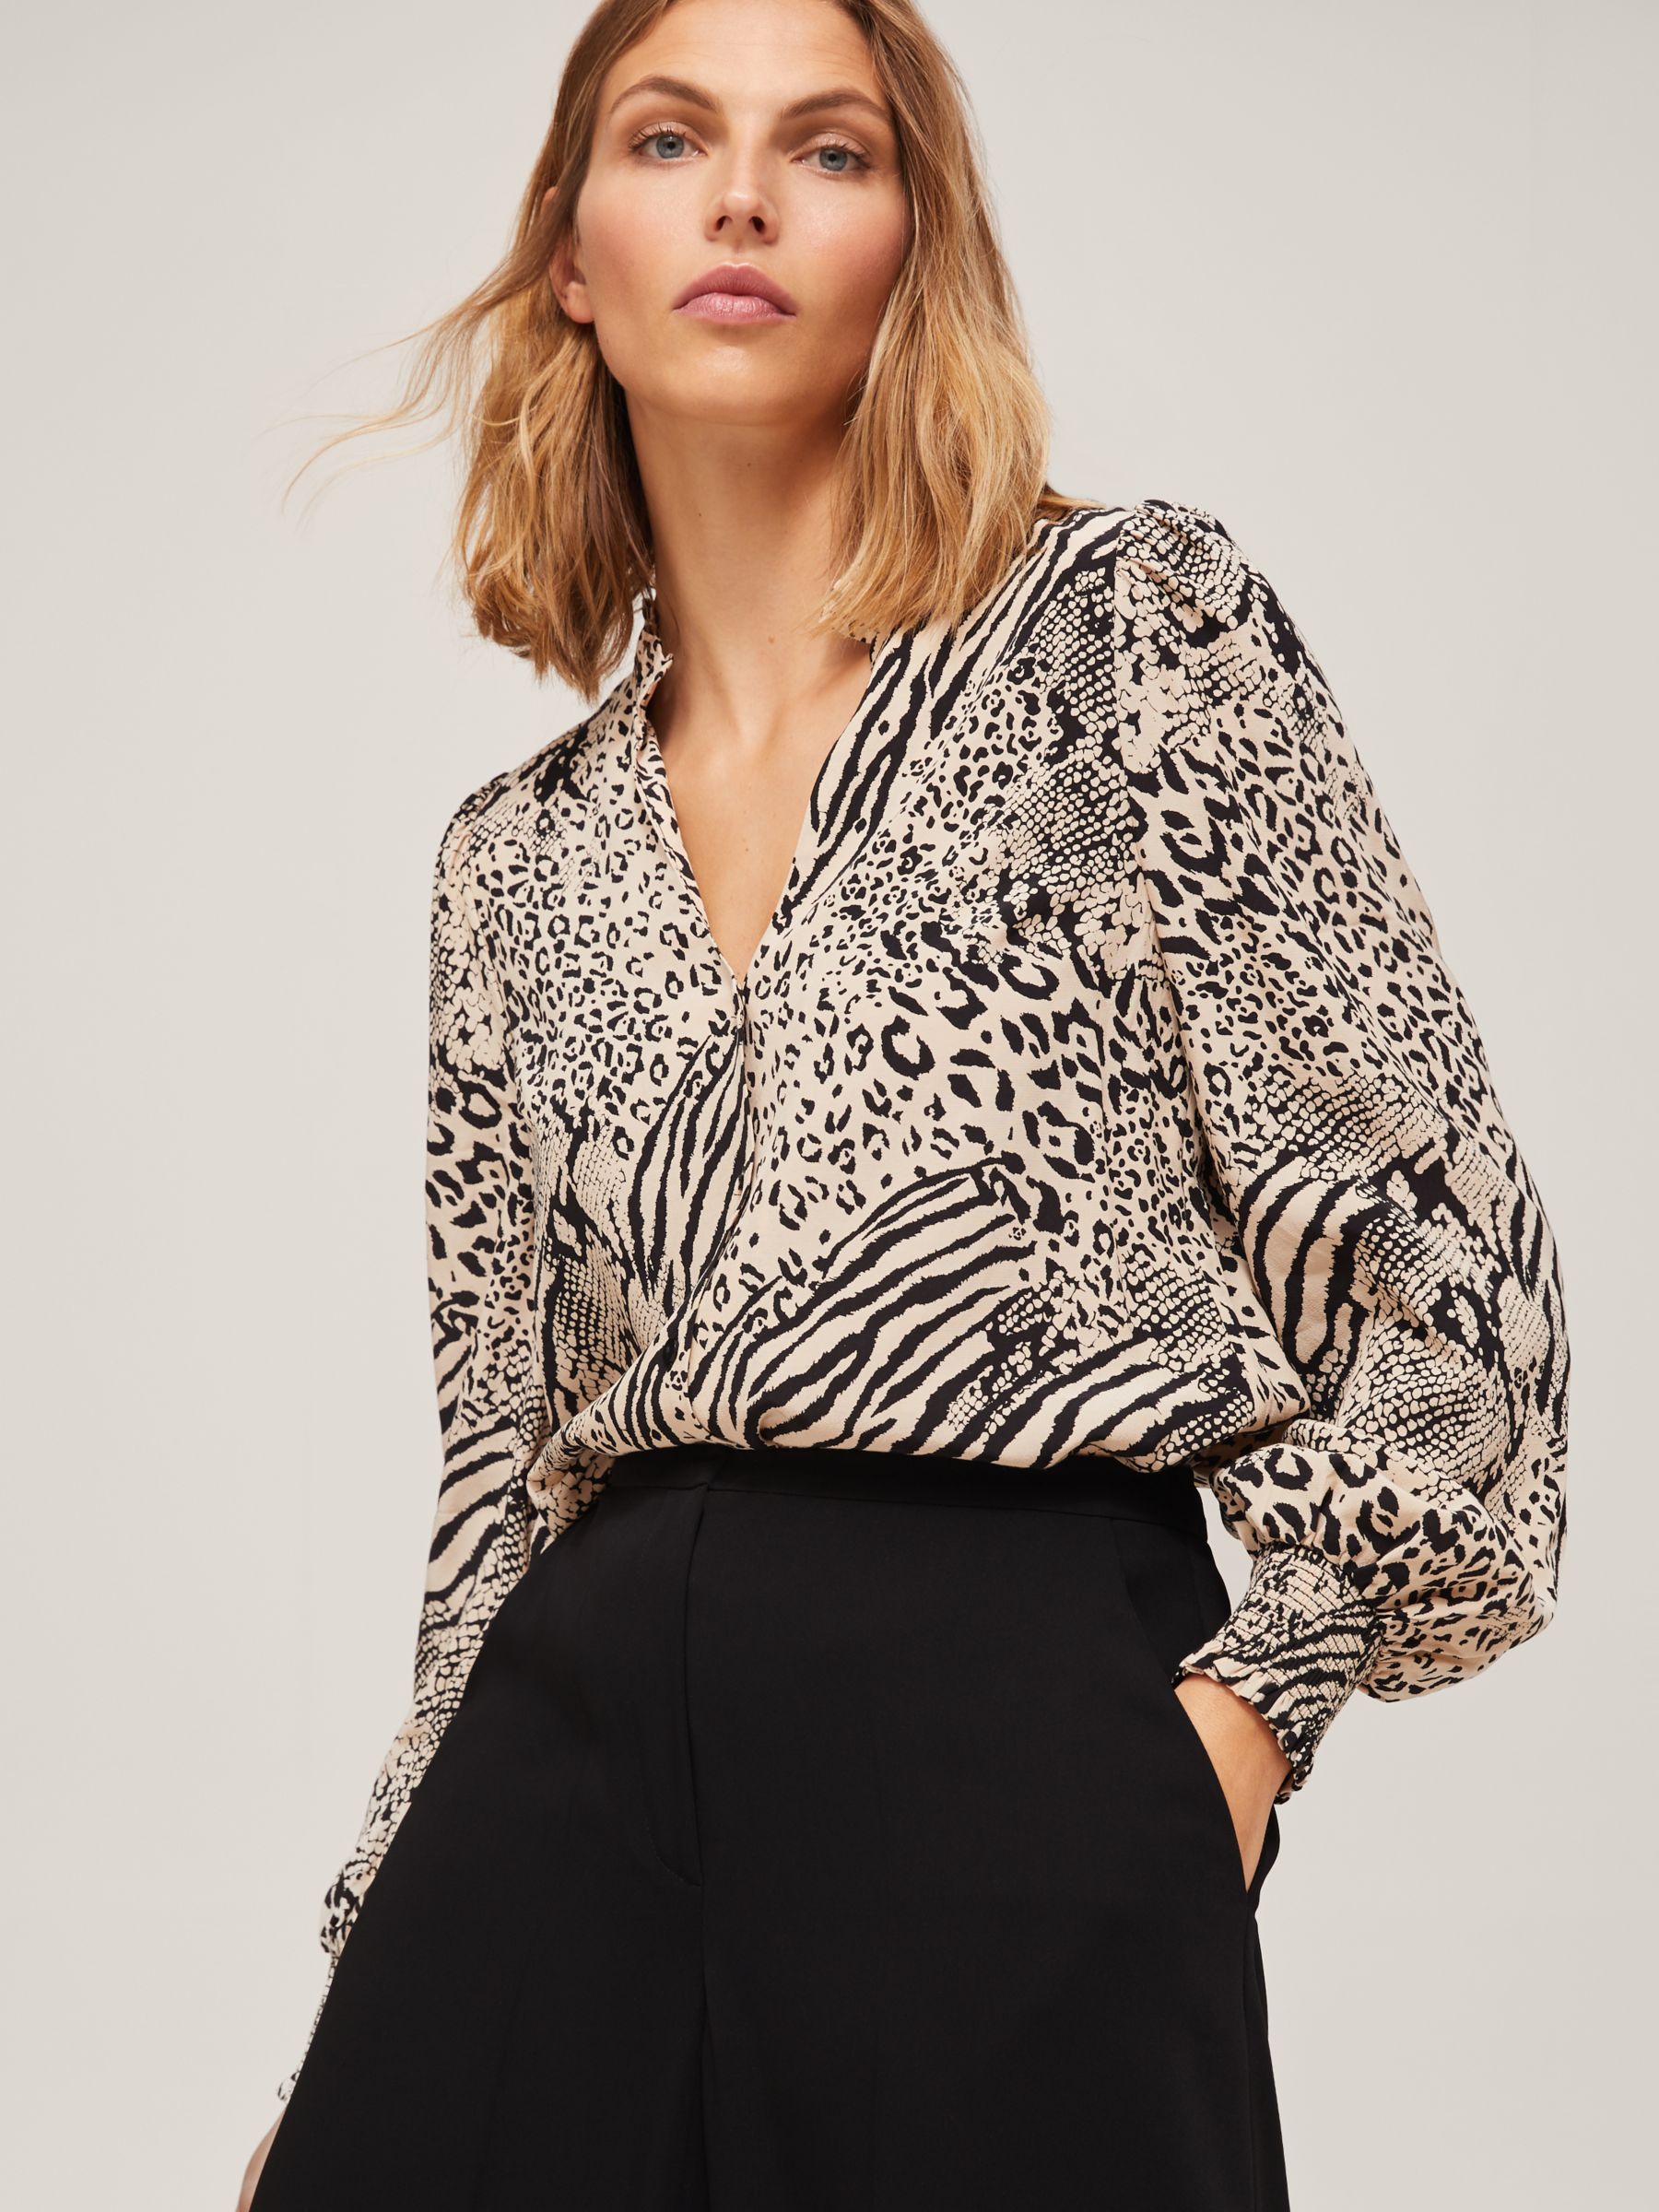 Somerset by Alice Temperley Mixed Animal Print Blouse, Neutral/Black